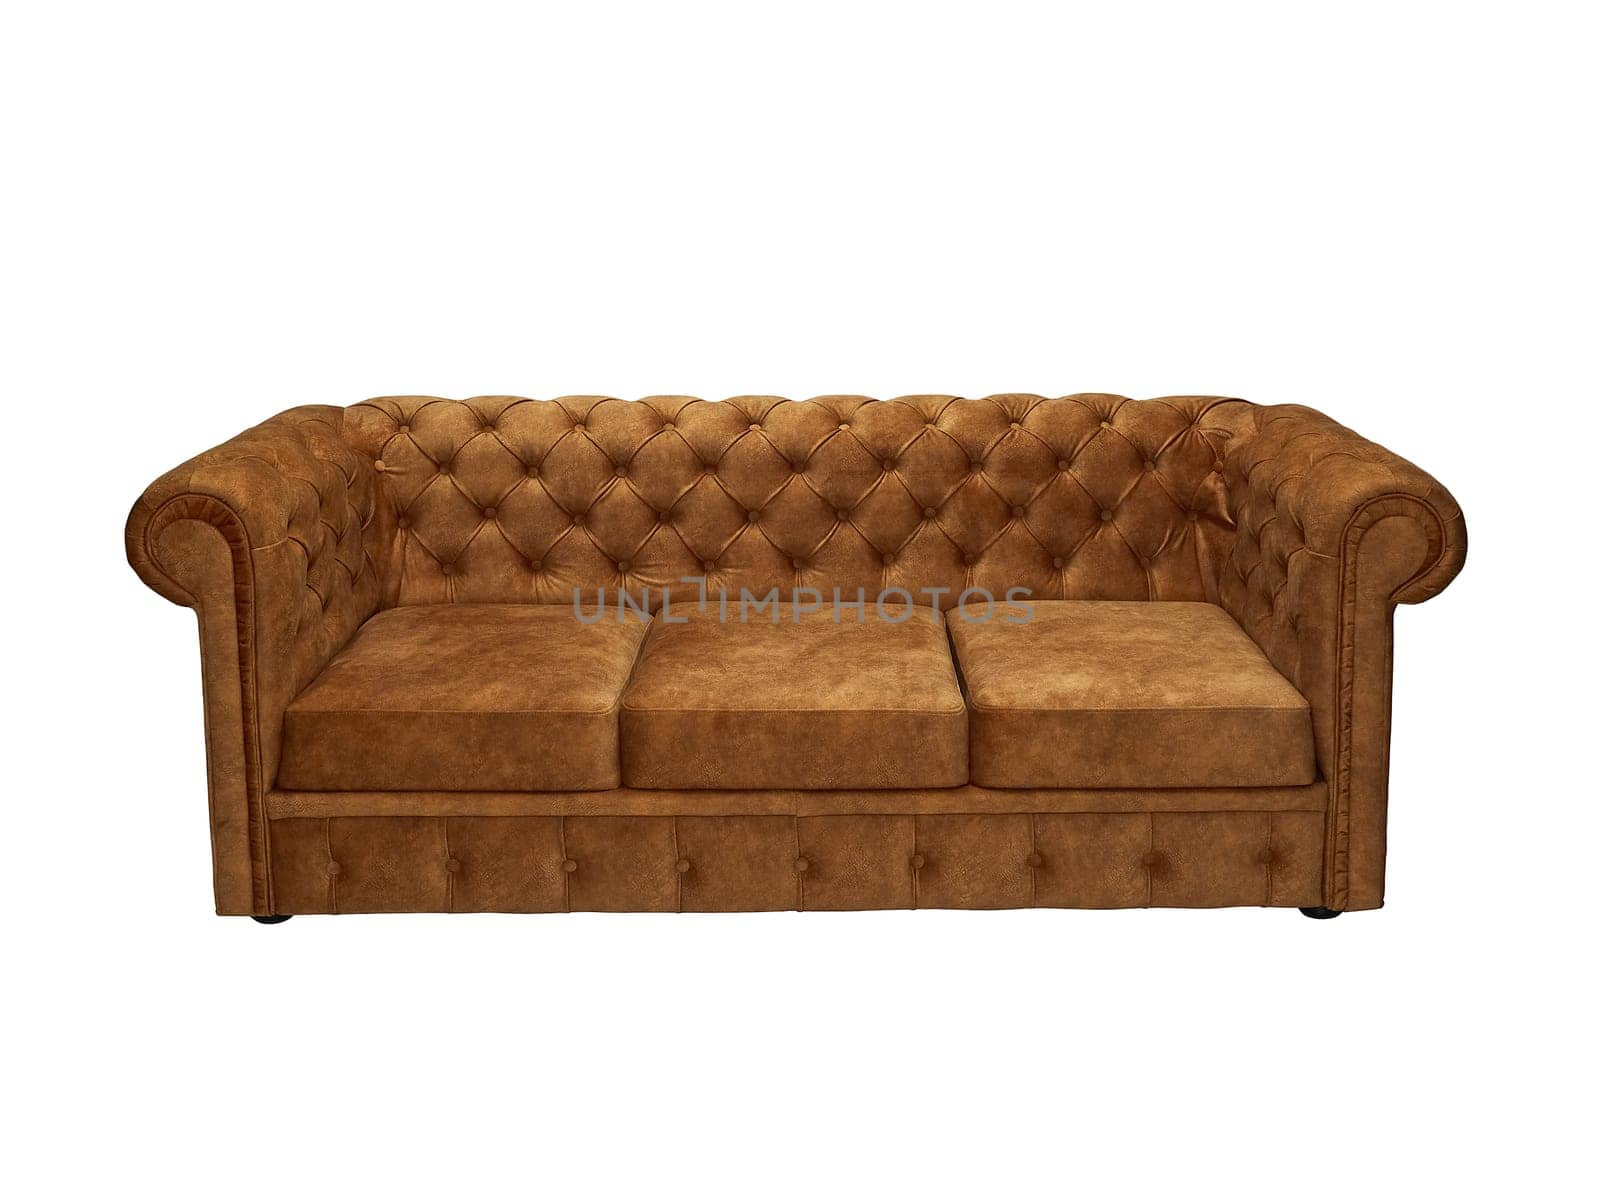 brown fabric sofa isolated on white background, front view. couch, furniture in minimal style, interior, home design